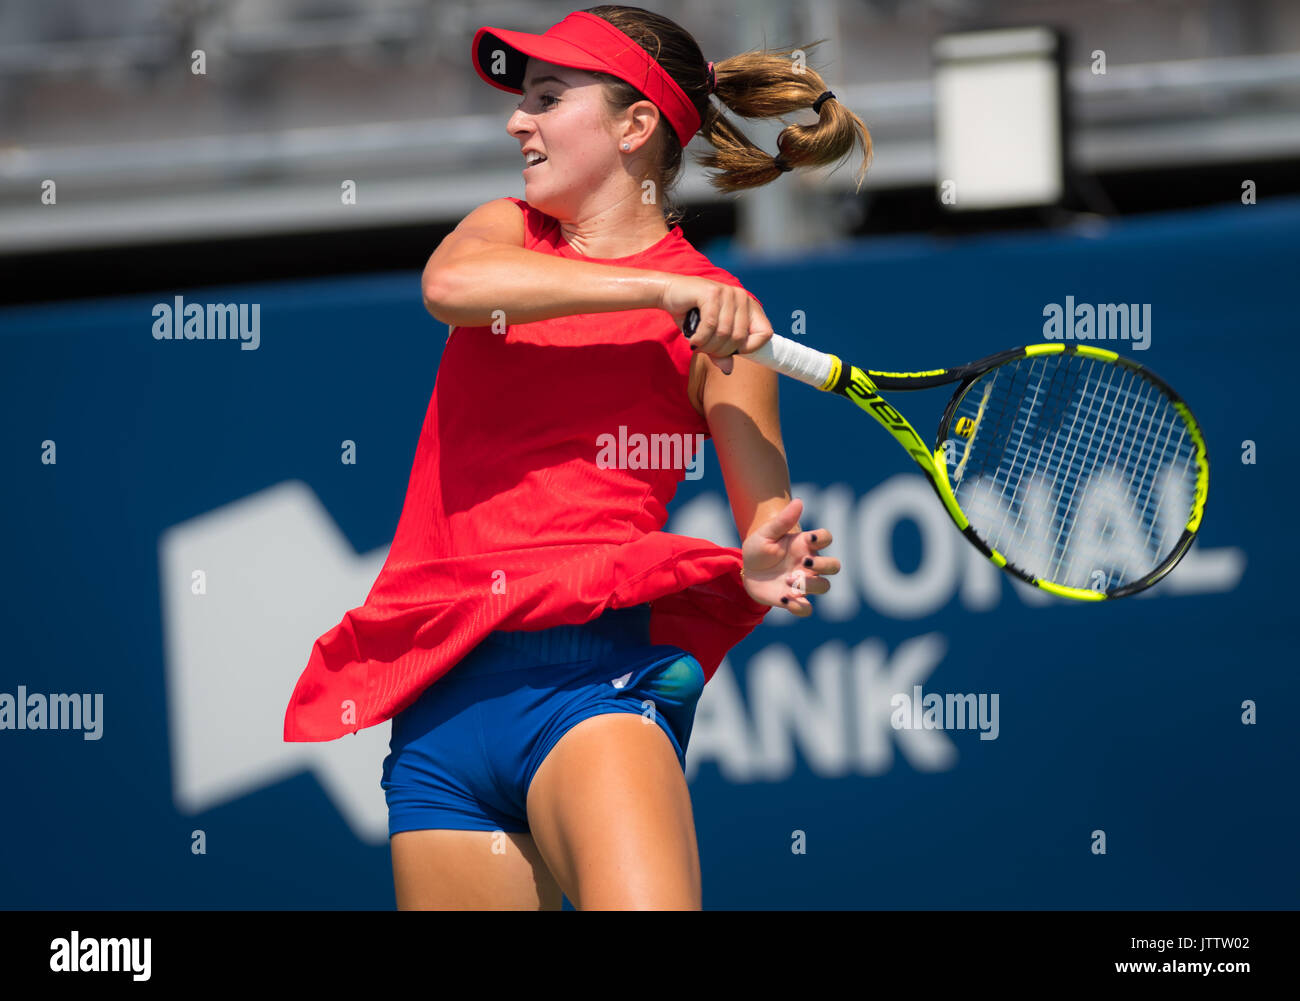 Toronto, Canada. 9 August, 2017. Catherine Bellis of the United States at  the 2017 Rogers Cup WTA Premier 5 tennis tournament © Jimmie48  Photography/Alamy Live News Stock Photo - Alamy